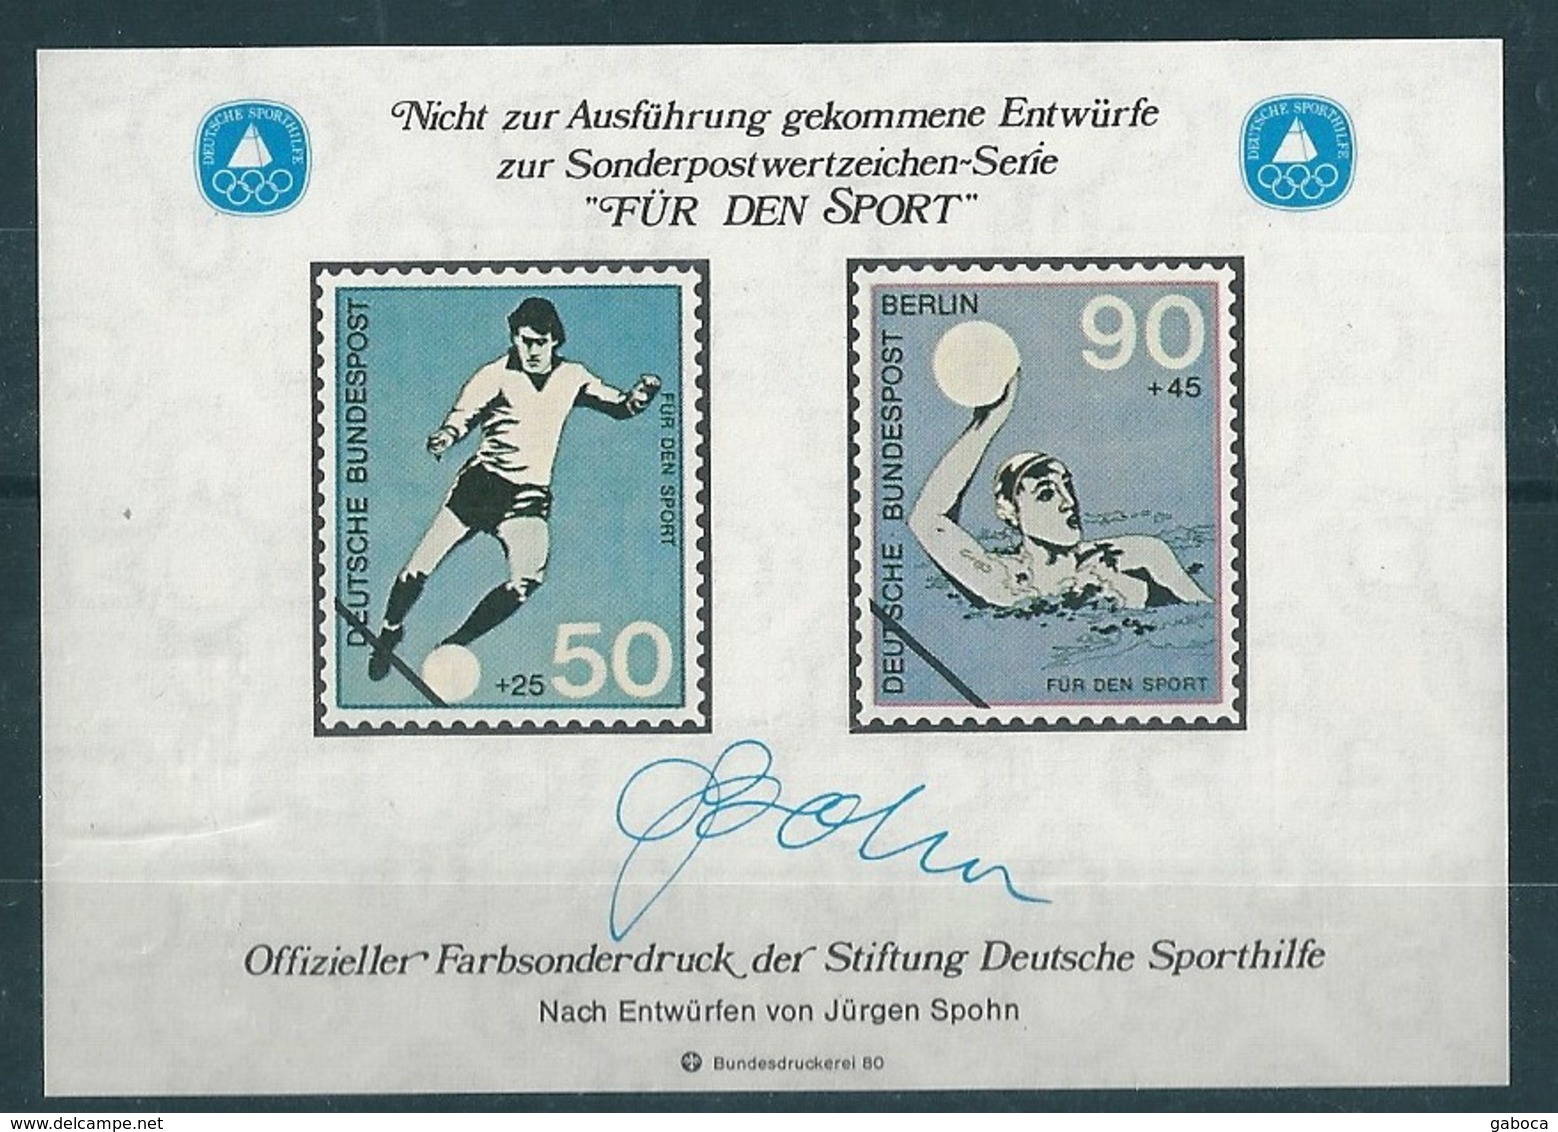 2107 Germany Berlin For Sport Aid Water Polo Football Soccer Official Special Colour Print 3xS/S MNH Lot#99 - Wasserball